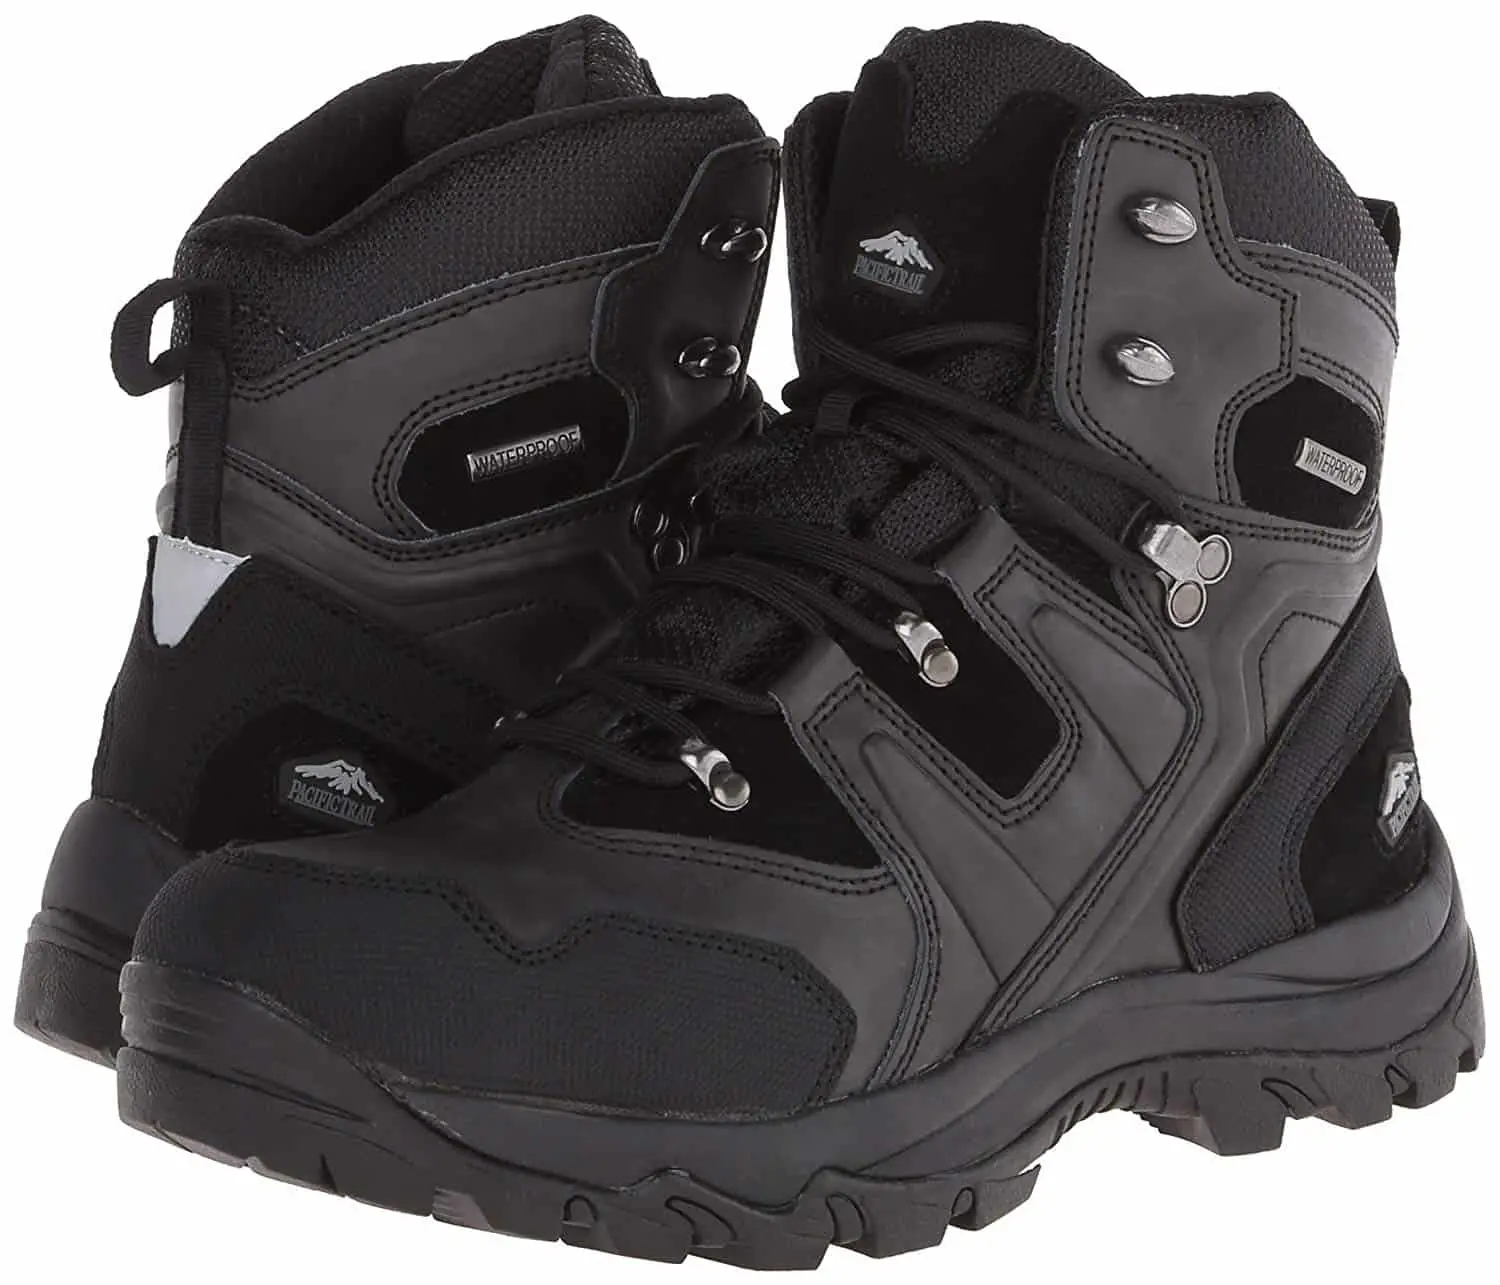 denali clearwater hiking boots